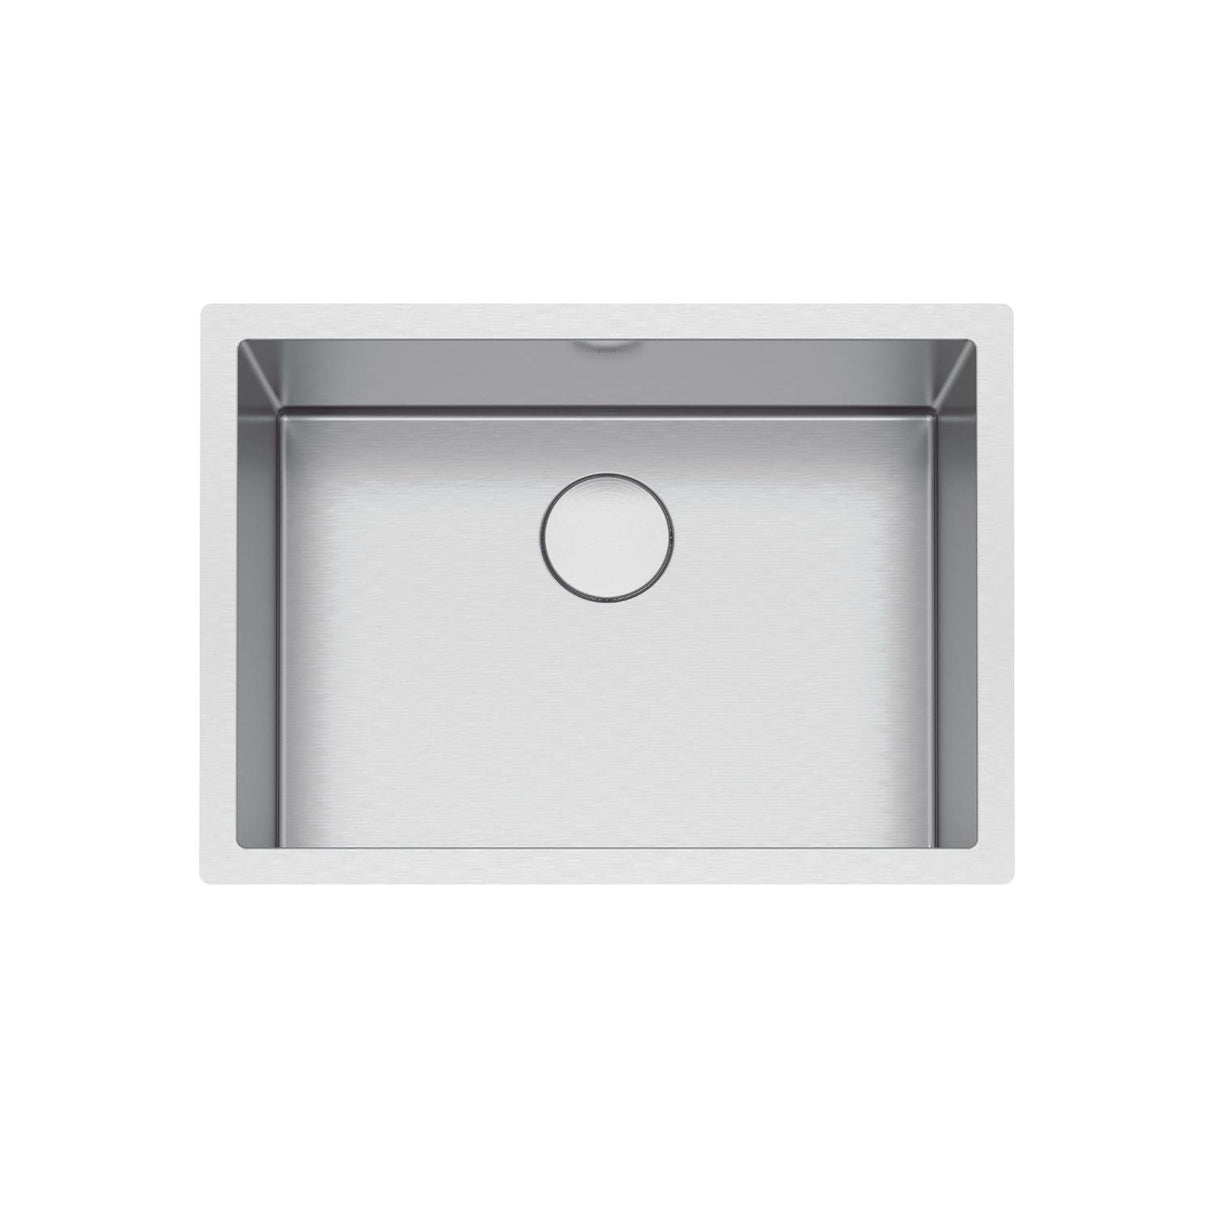 FRANKE PS2X110-24-12 Professional 2.0 26.5-in. x 19.5-in. x 12.0-in. 16 Gauge Stainless Steel Undermount Single Bowl Kitchen Sink - PS2X110-24-12 In Diamond